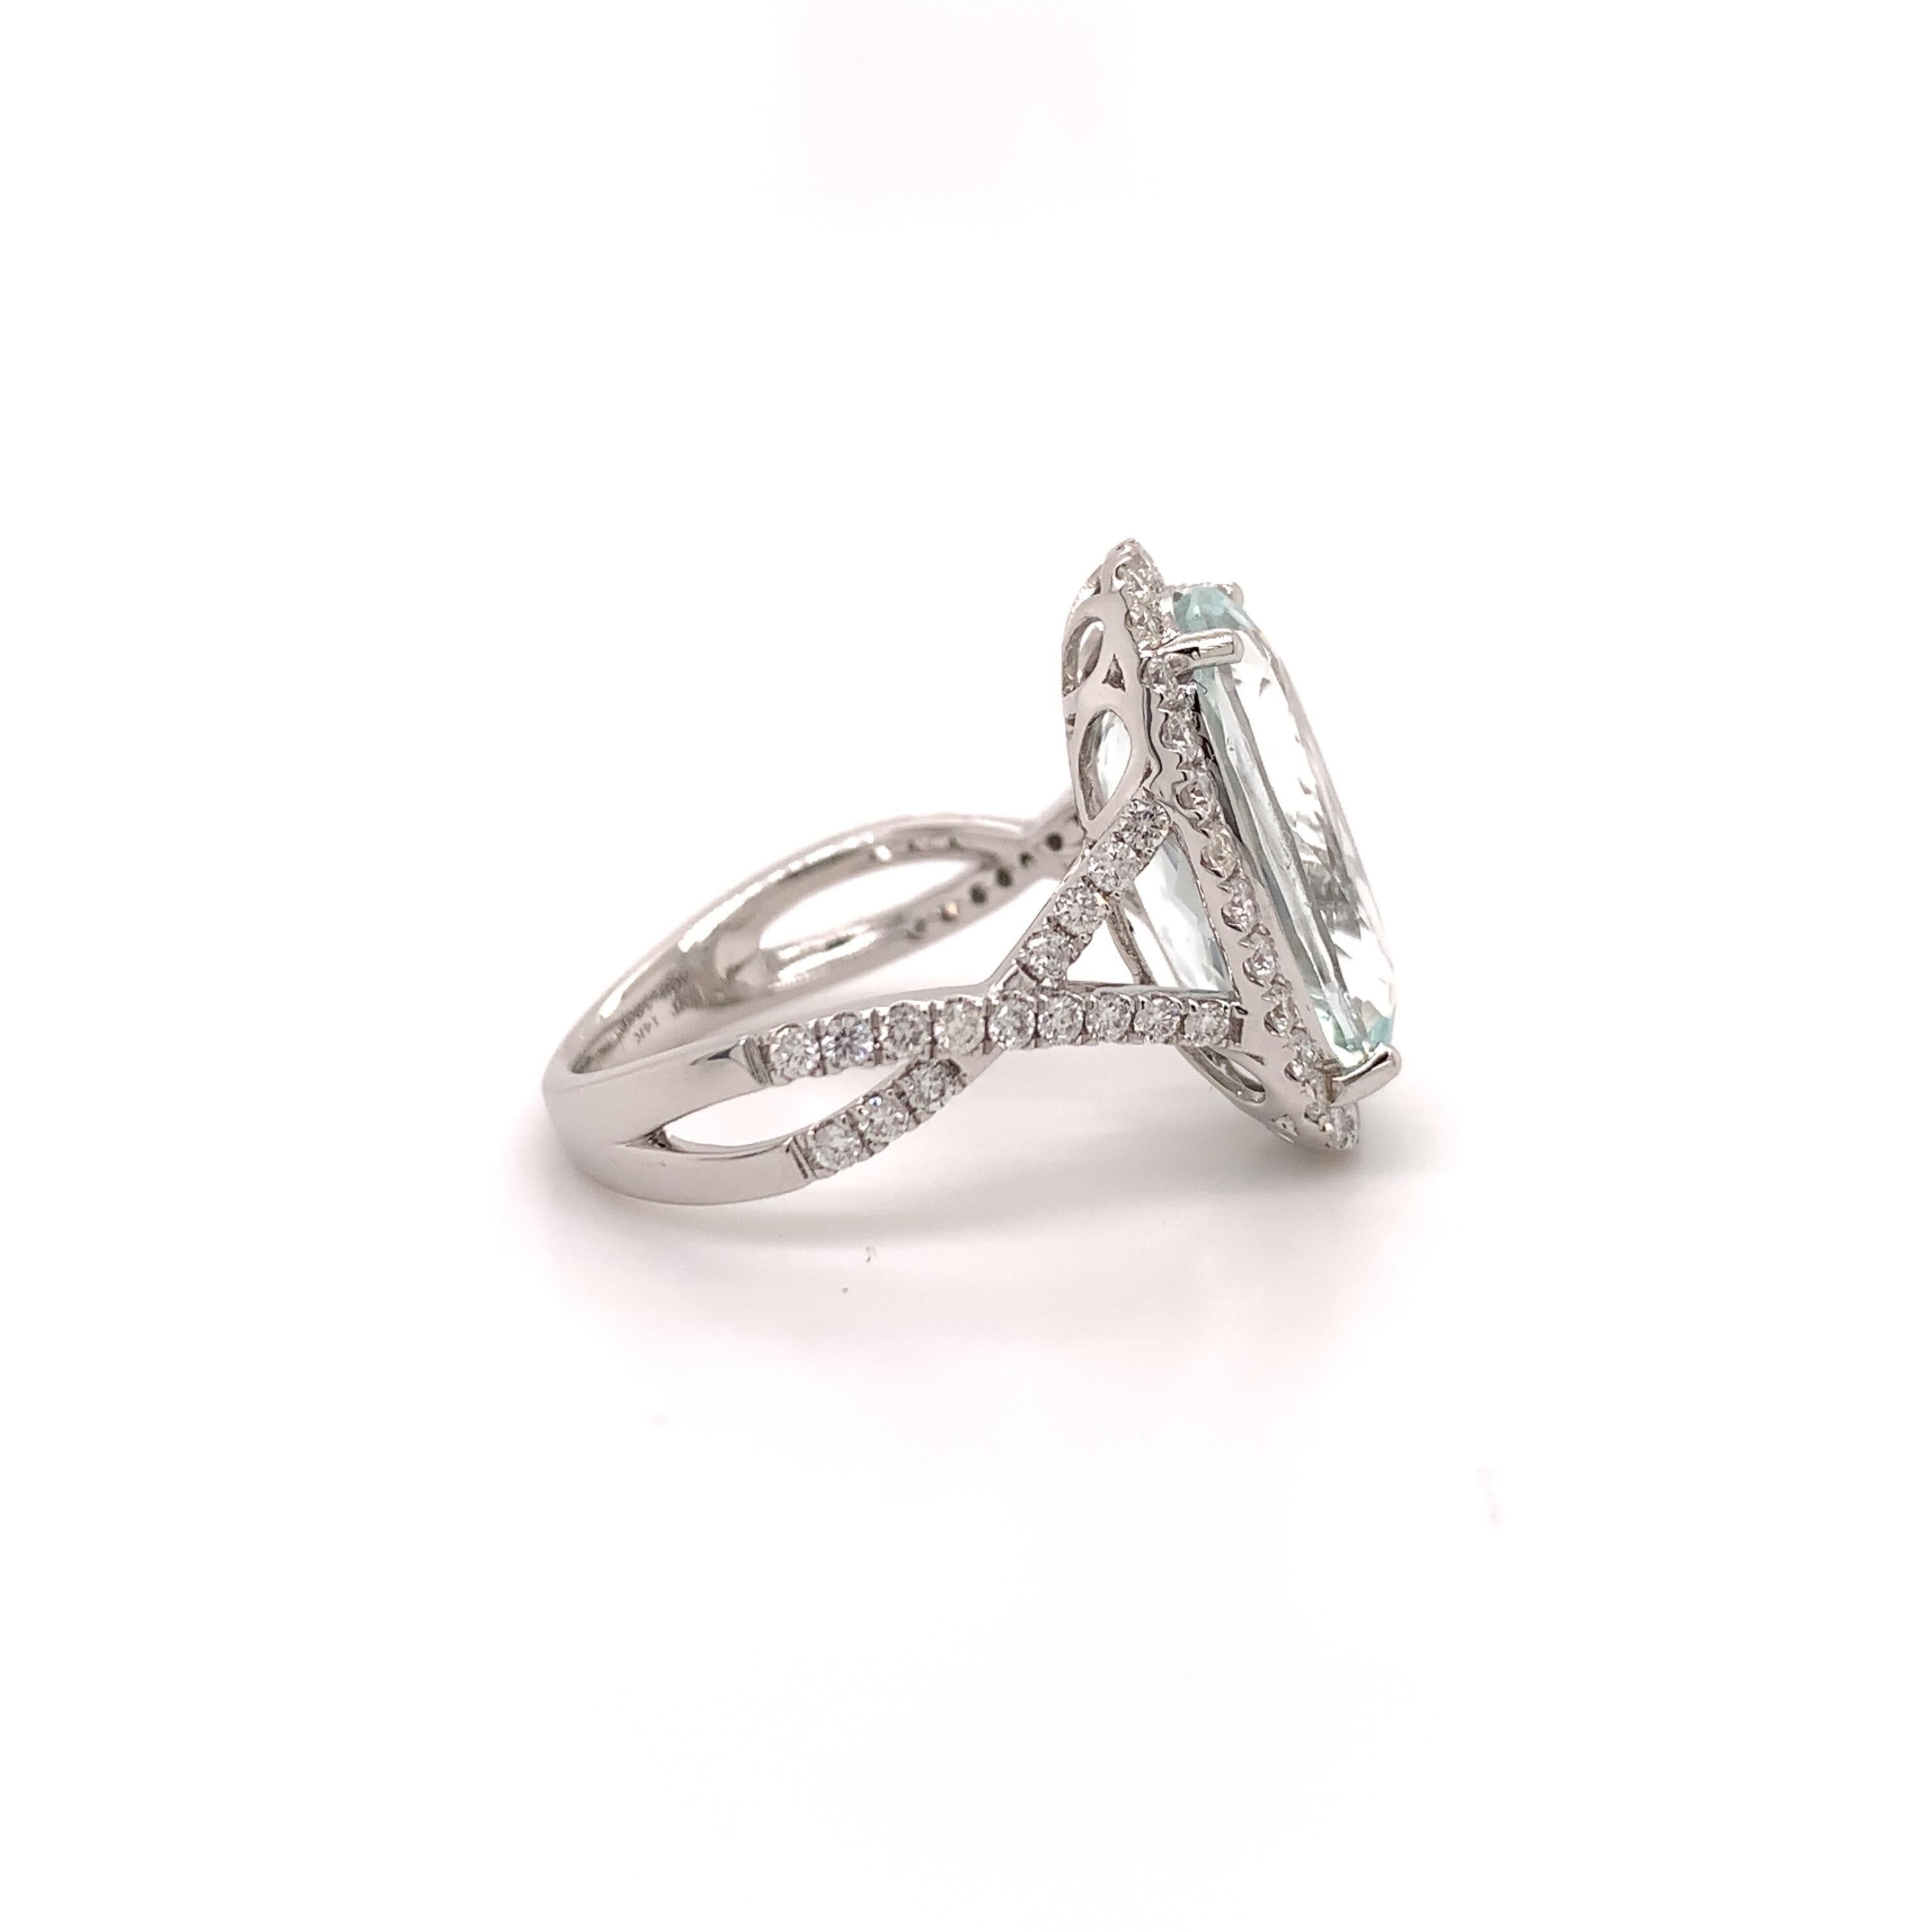 Stunning aquamarine cocktail ring. High brilliance, transparent, oval faceted, lively light sky blue 5.12 carats natural aquamarine mounted in high profile open basket, accented with a round brilliant cut diamond on the split shank and halo design.